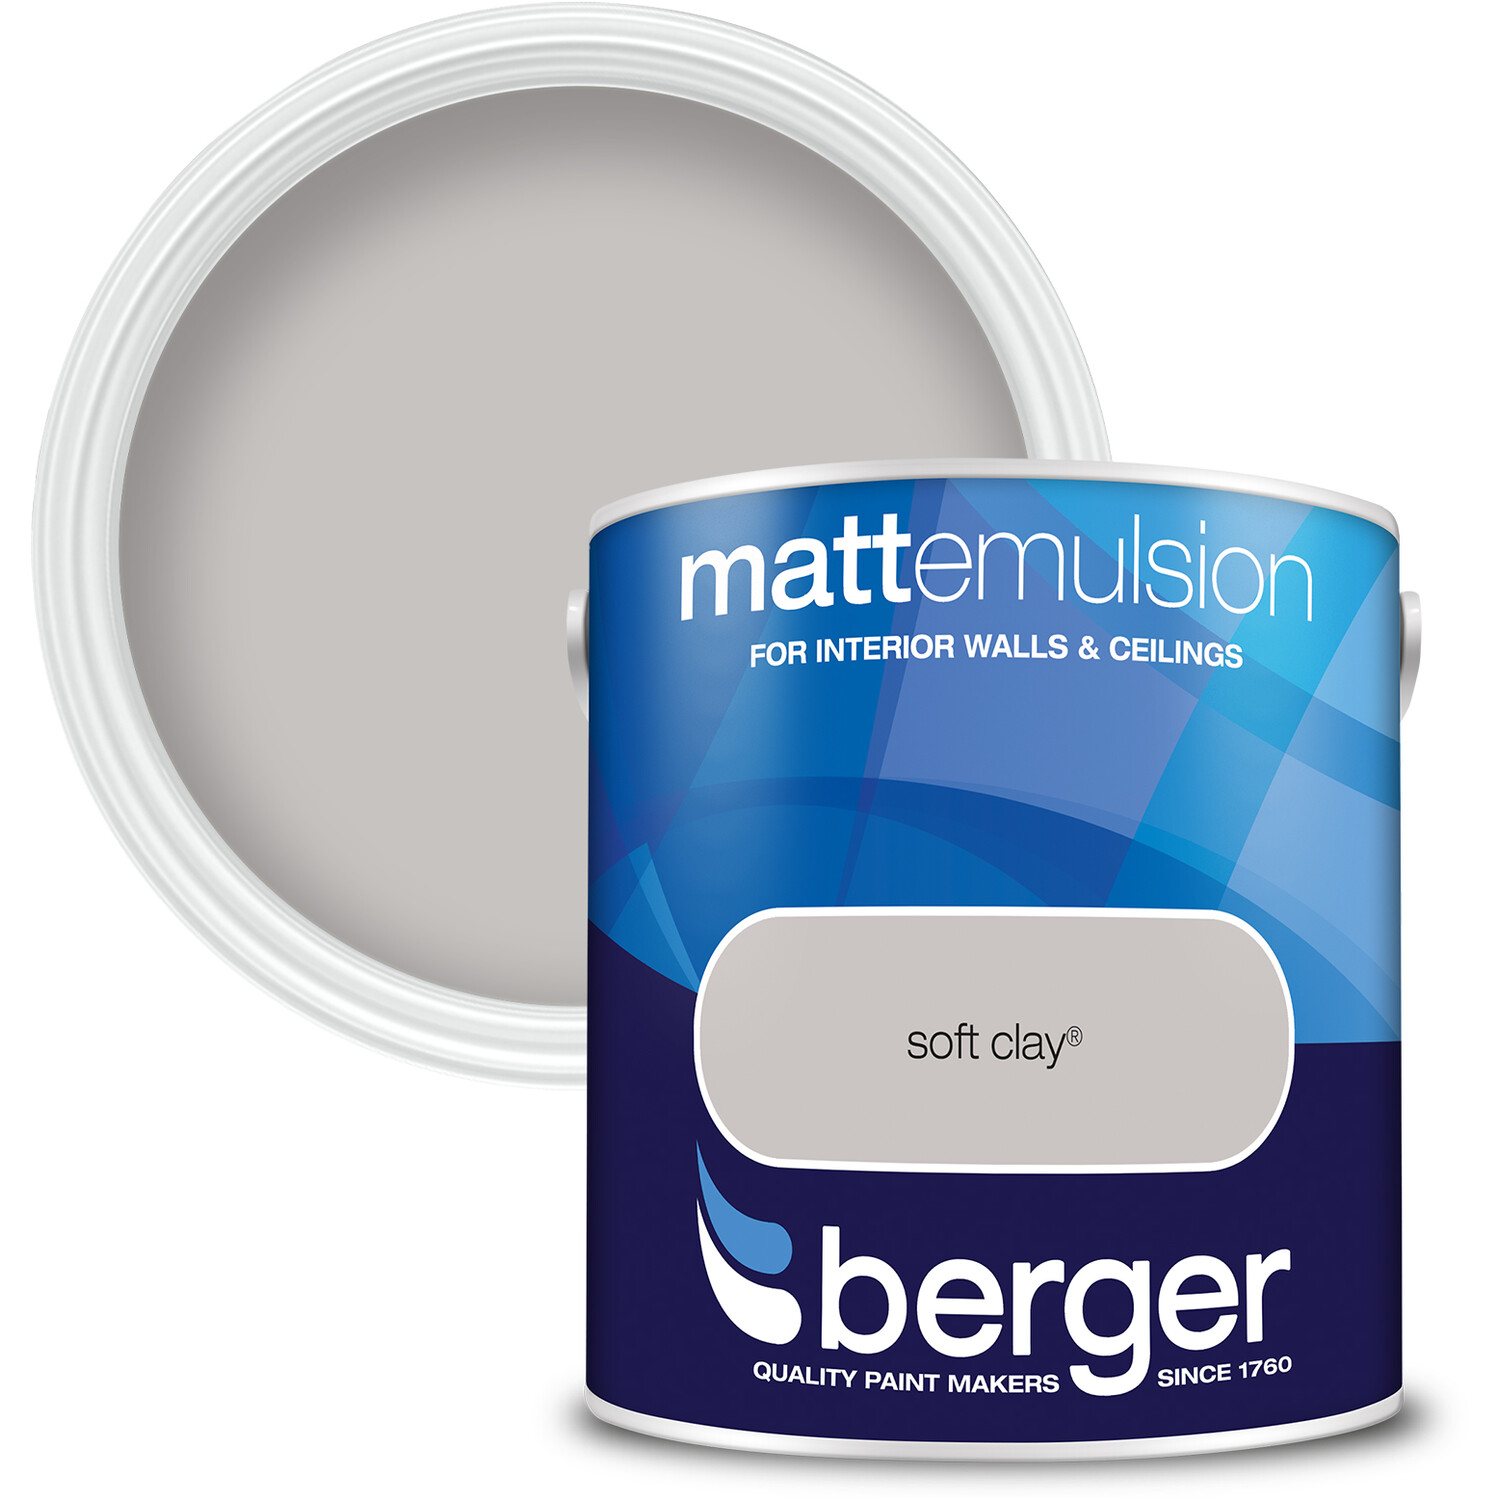 Berger Walls and Ceilings Soft Clay Matt Emulsion Paint 2.5L Image 1